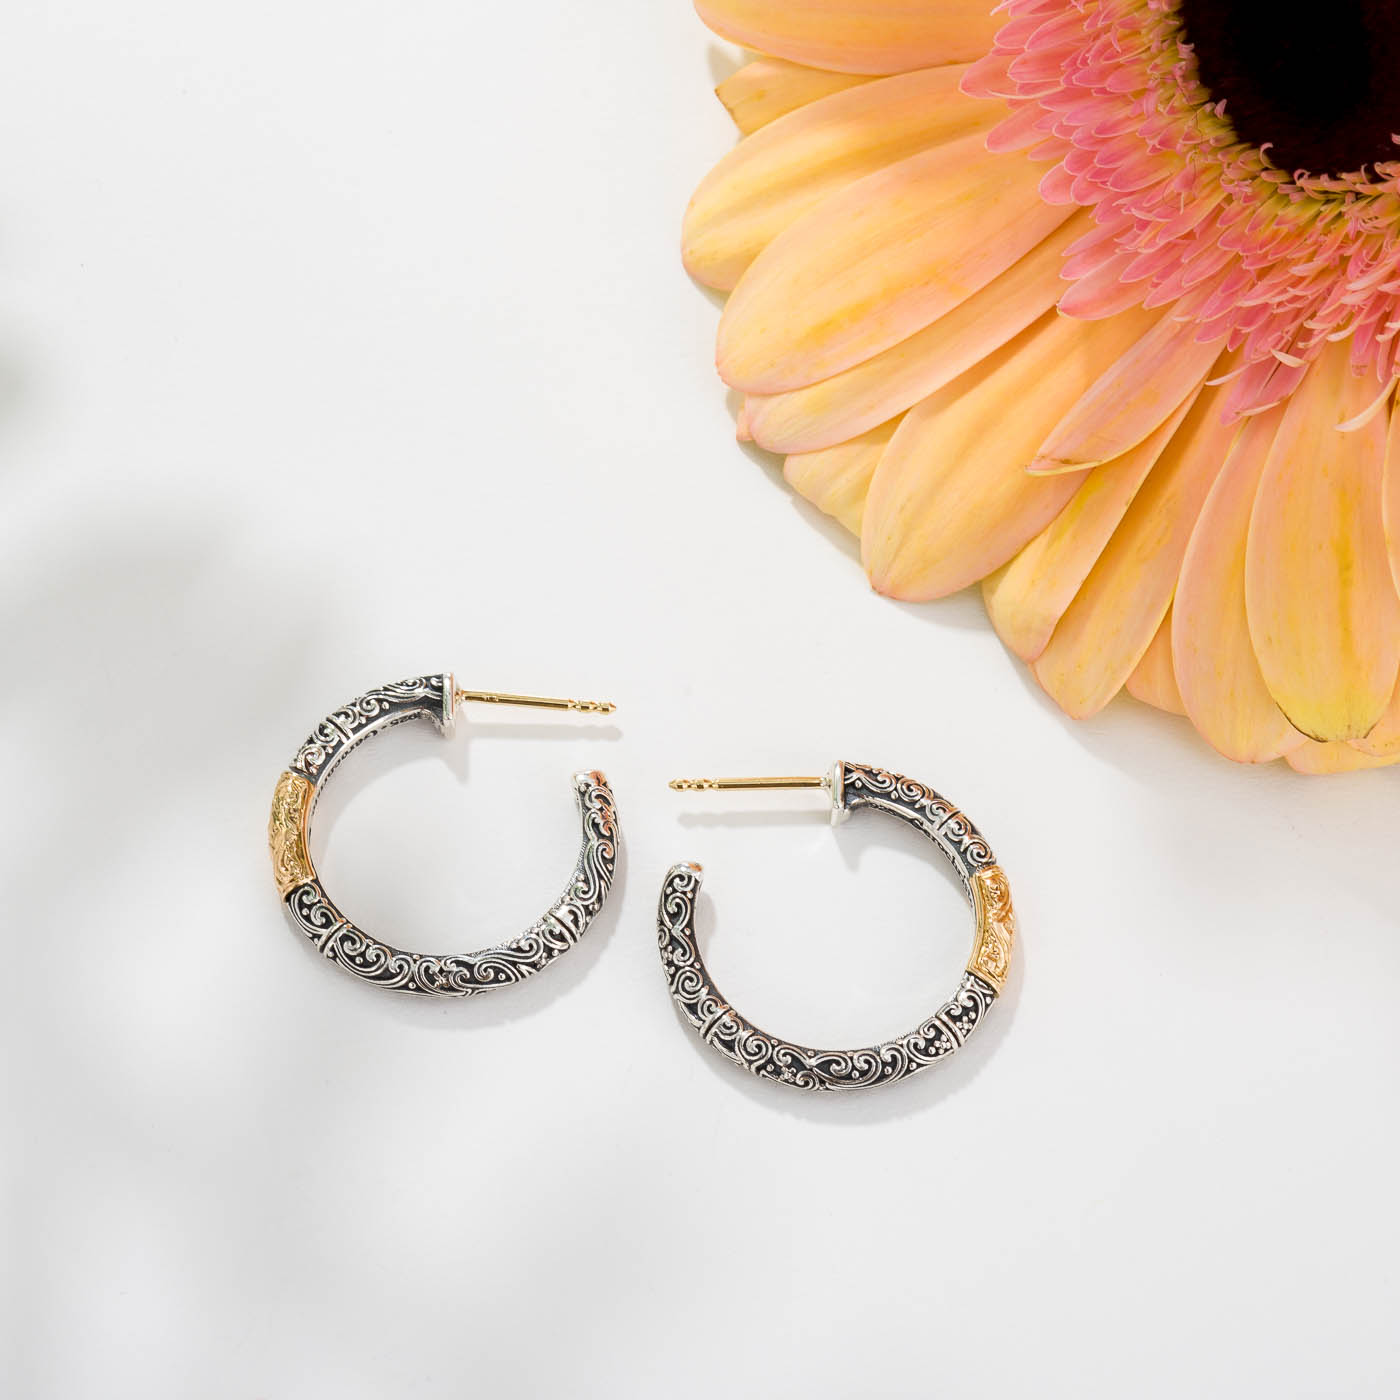 Eve hoops Earrings in 18K Gold and Sterling Silver